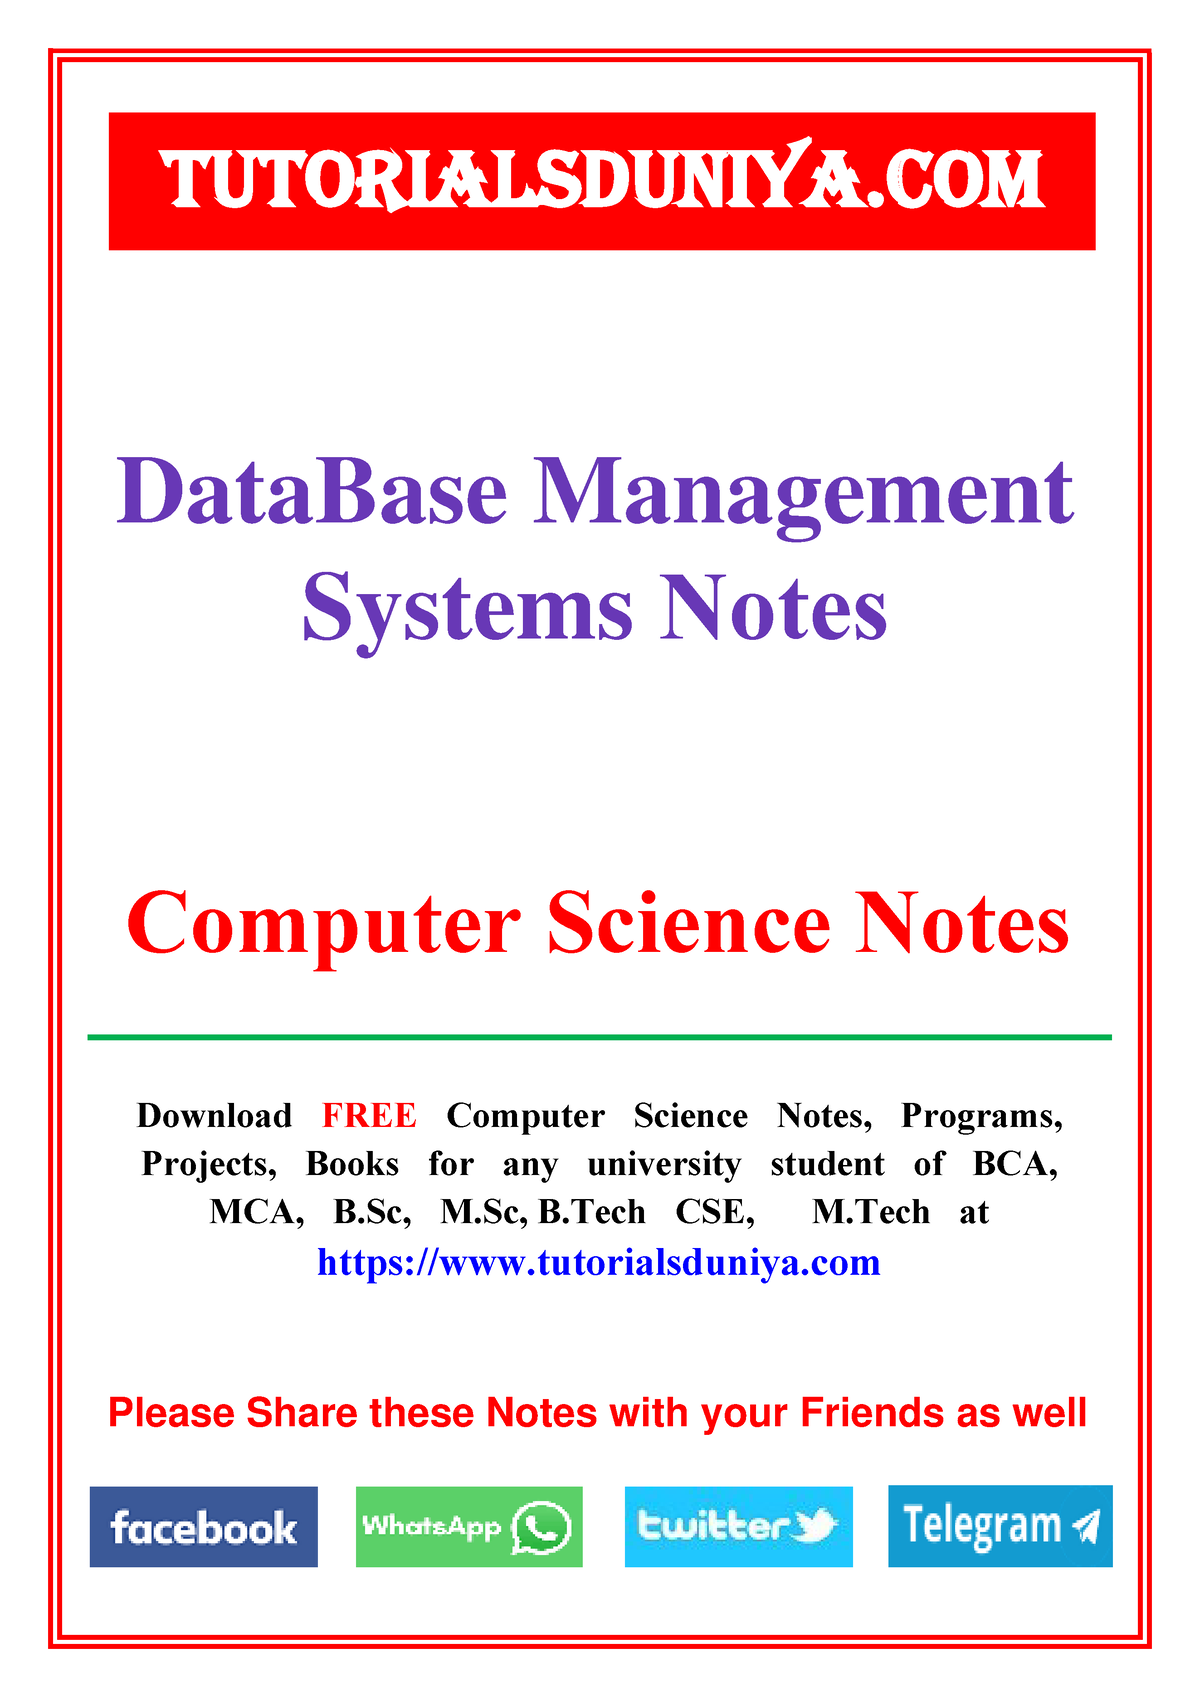 computer networks notes in hindi